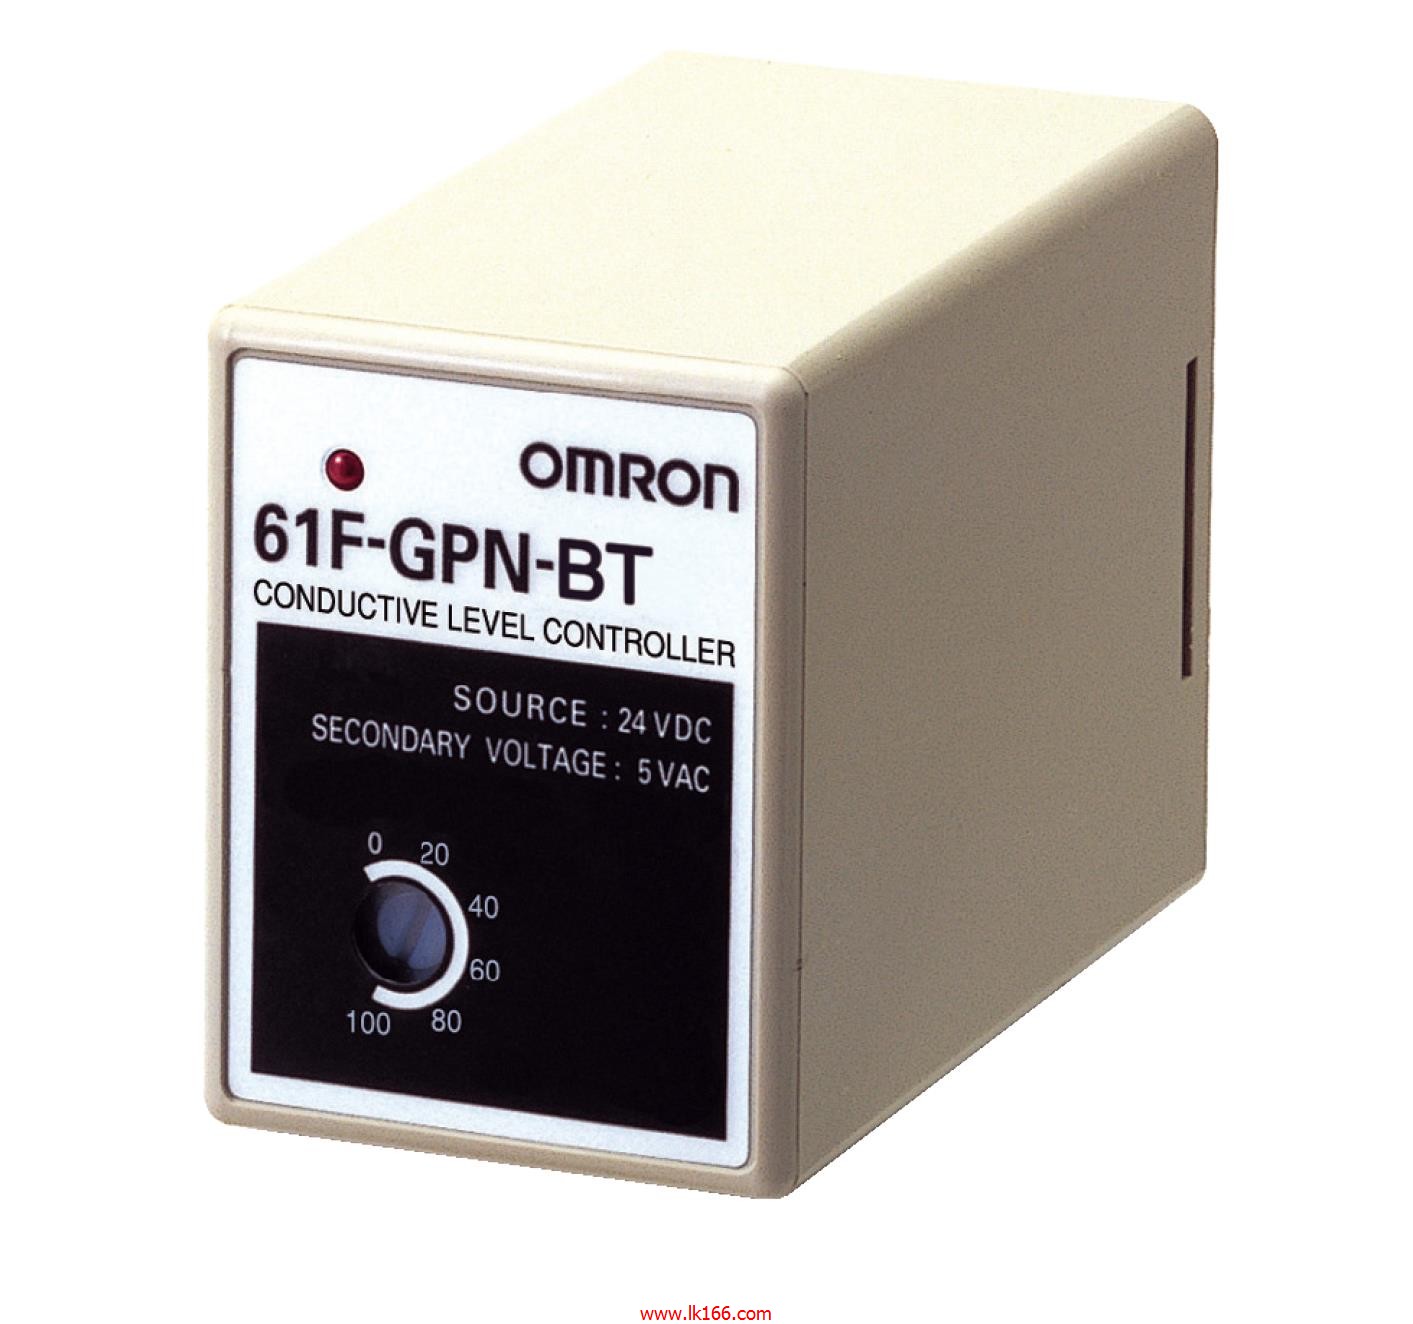 OMRON Conductive Level Controller 61F-GPN-BT